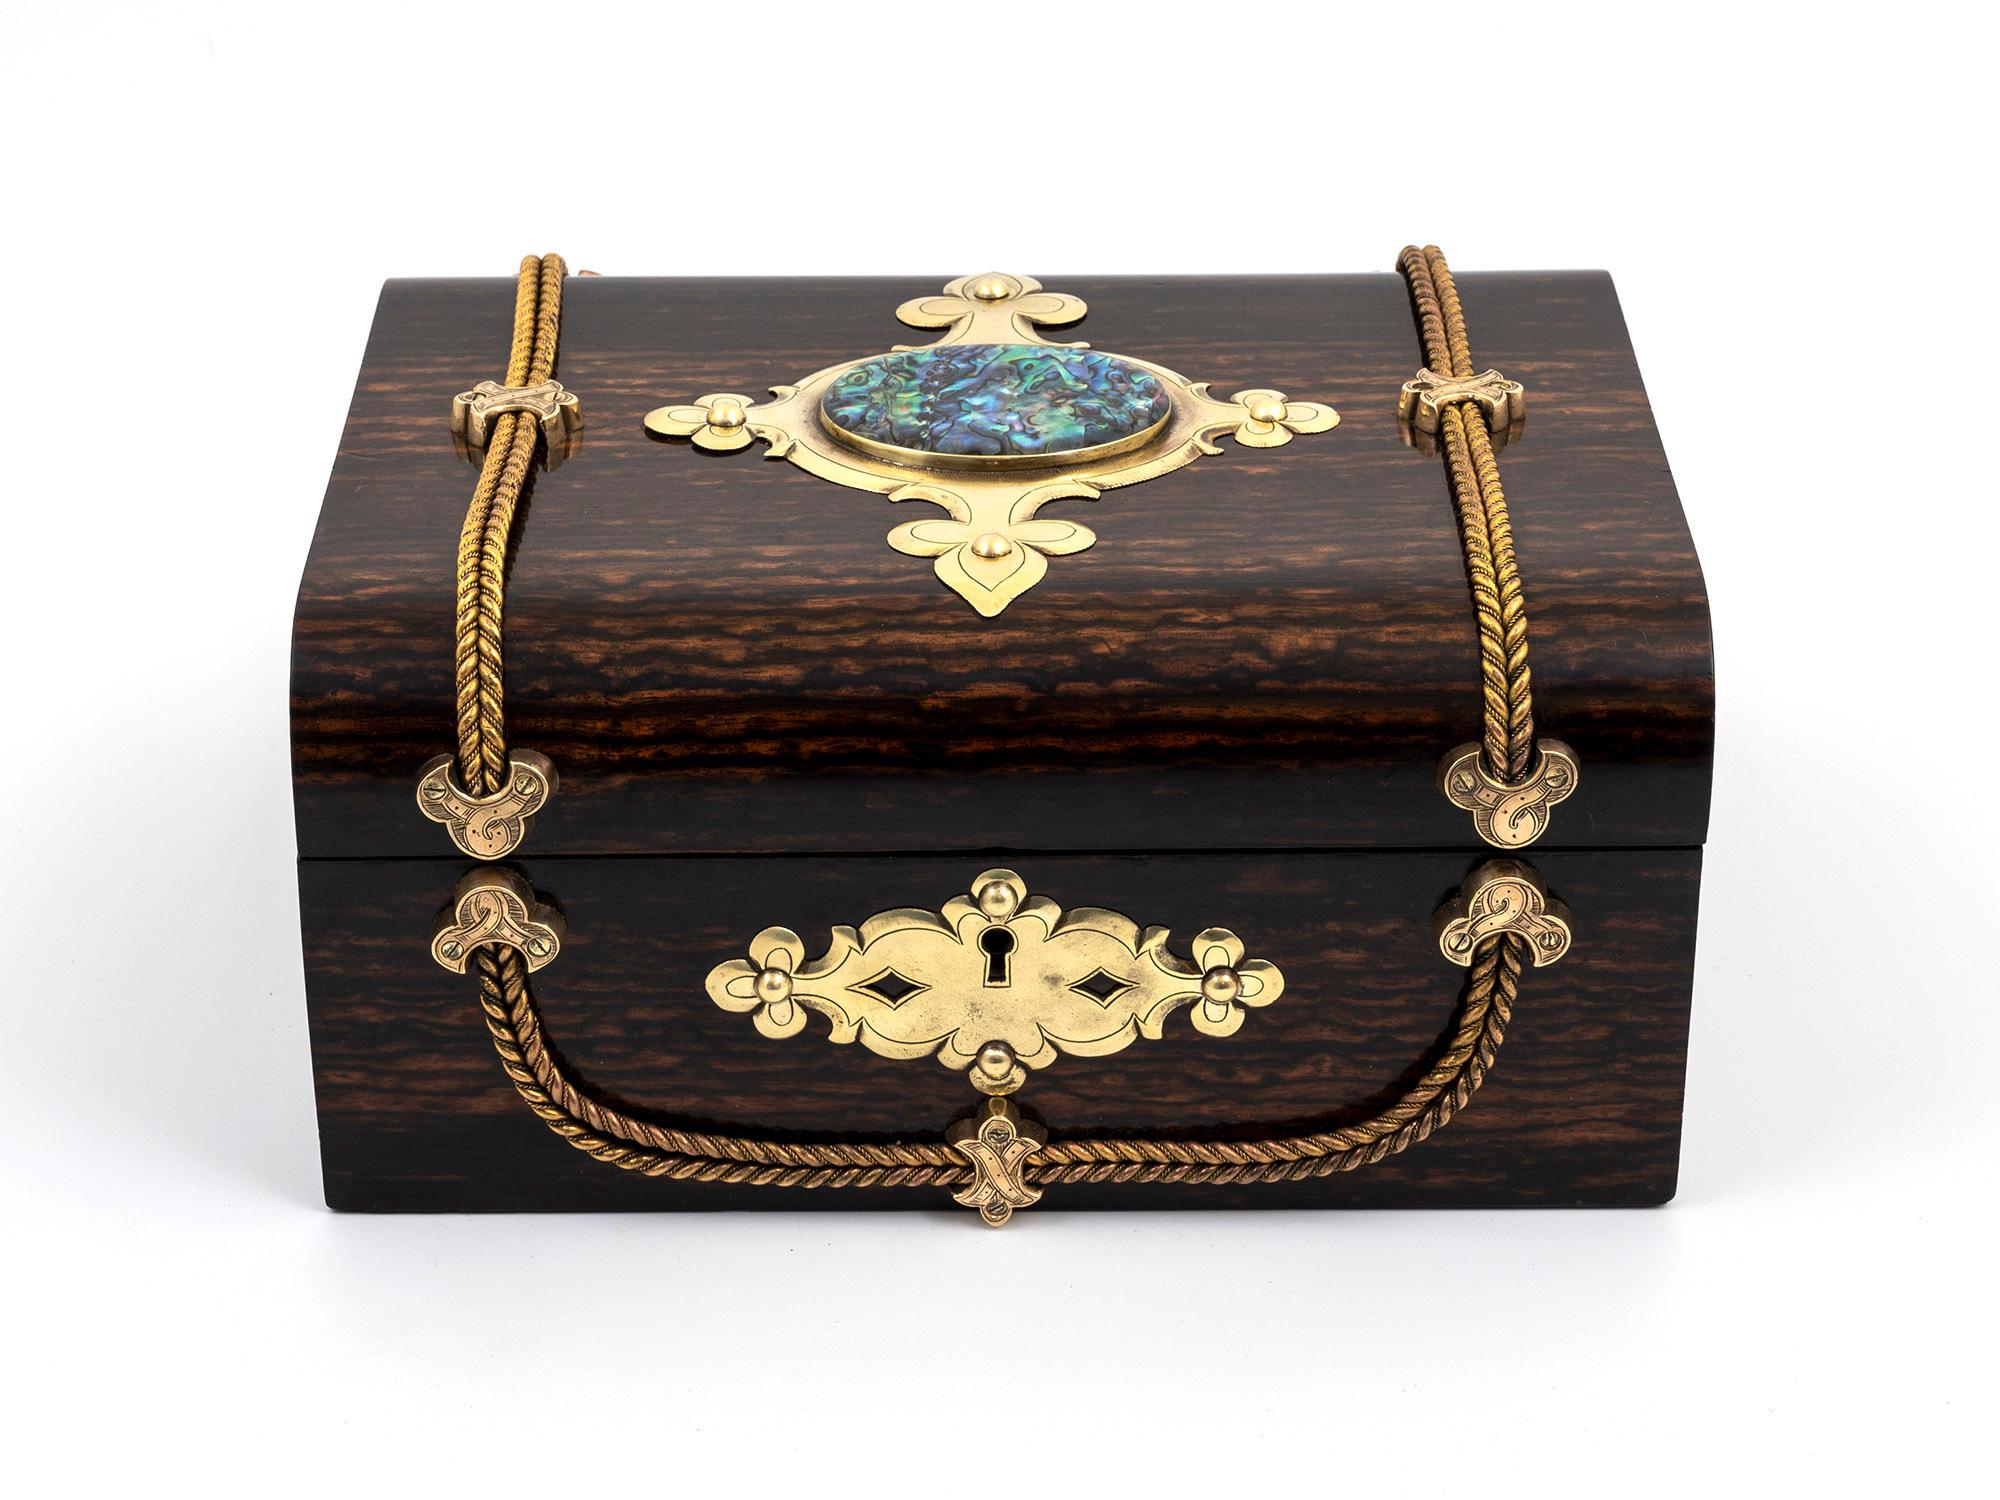 An exquisite antique dome-top jewellery box that embodies timeless elegance and superb craftsmanship.

The exterior of the box is veneered in exotic Coromandel, showcasing a captivating Abalone medallion at the centre of the lid. The medallion is